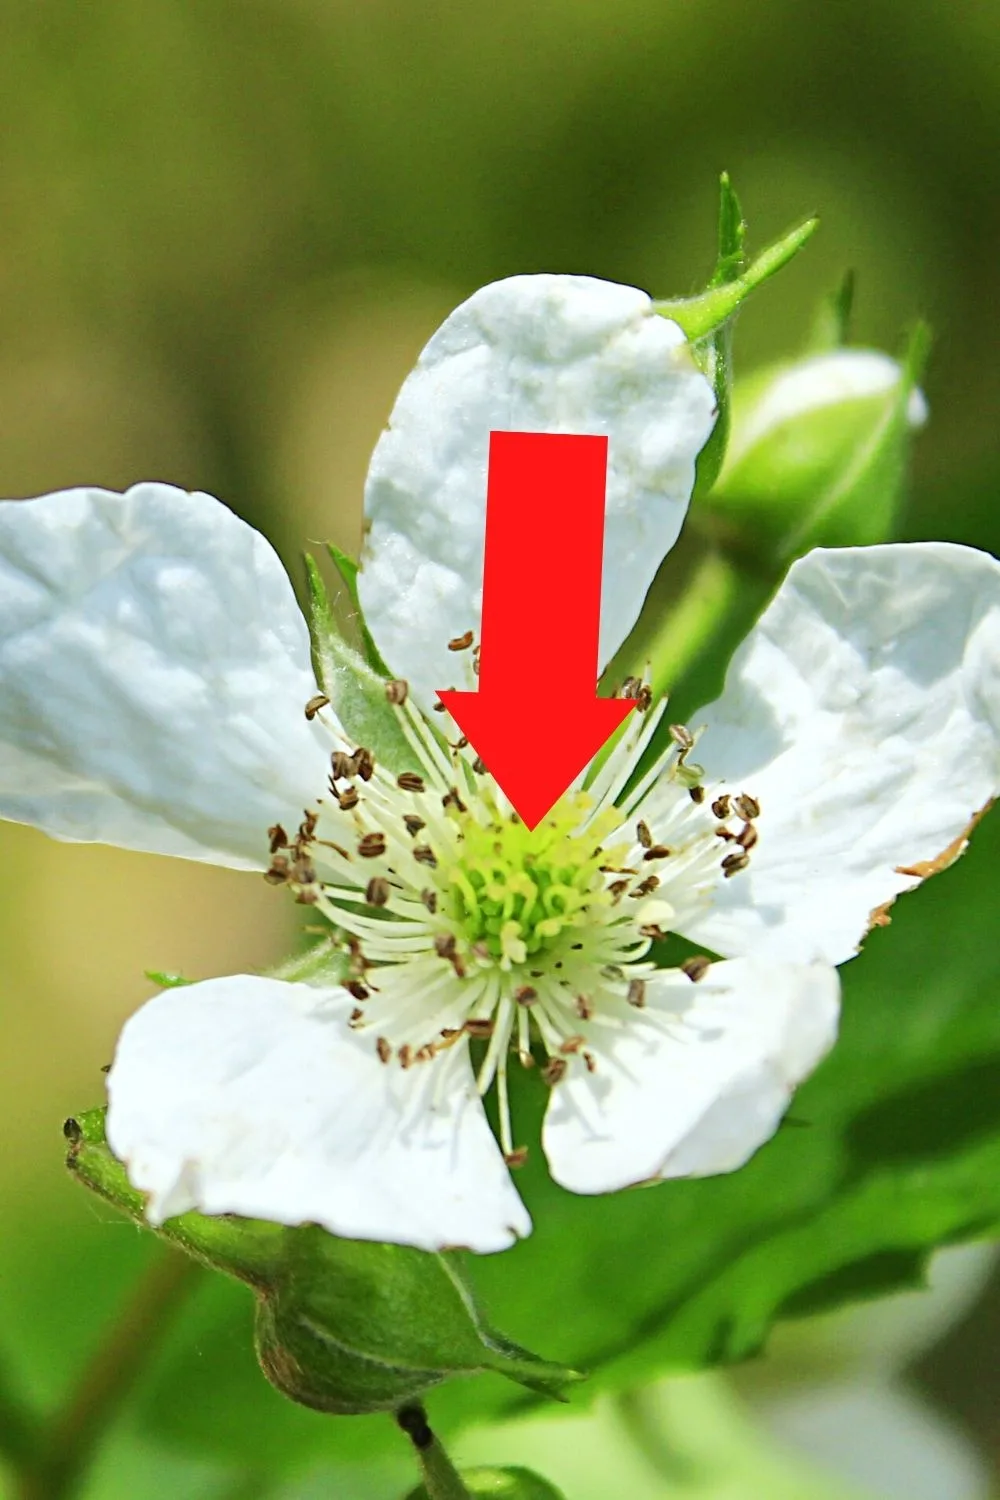 The raspberry hairs are remnants of the pistils, the female reproductive organ of the raspberry flower